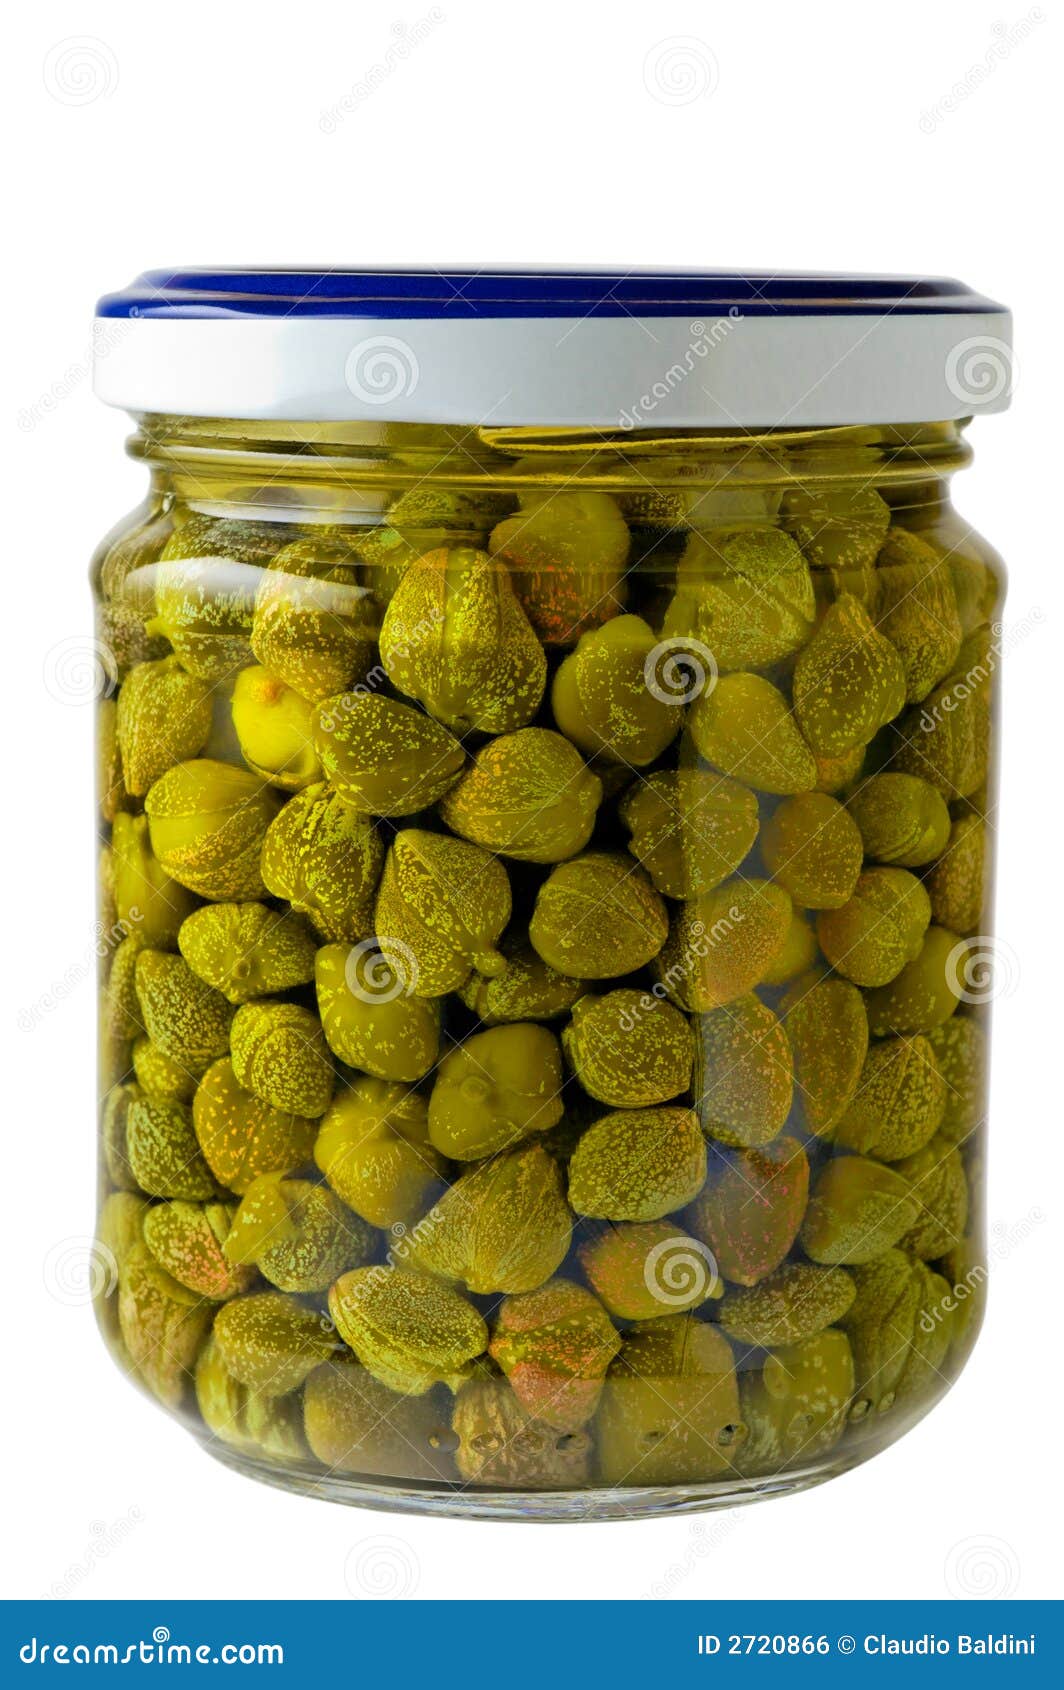 glass jar of preserved capers